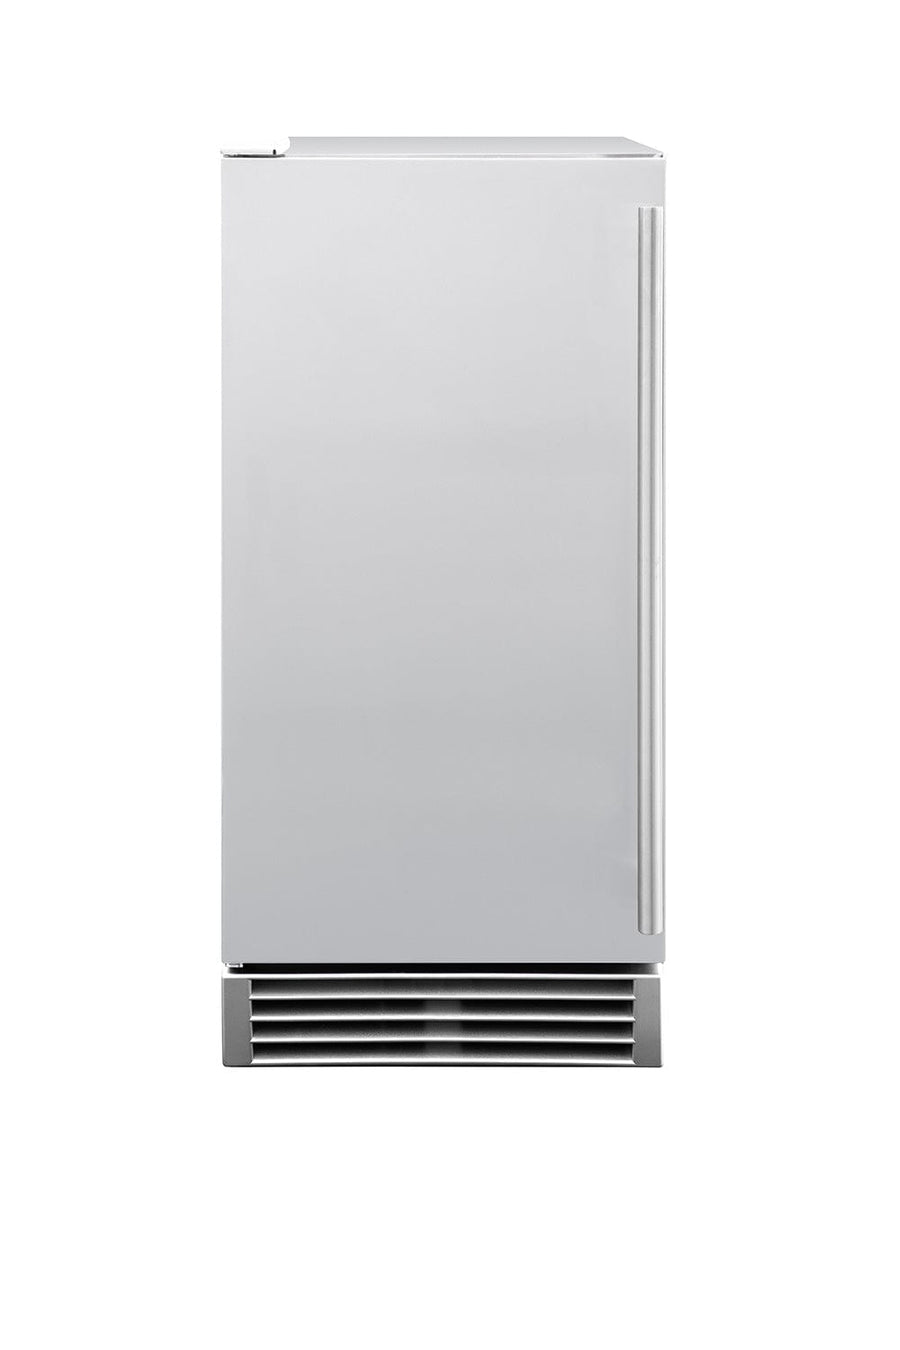 American Made Grills AMG 15" UL Outdoor Rated Ice Maker w/Stainless Door SSIM-15 outdoor kitchen empire